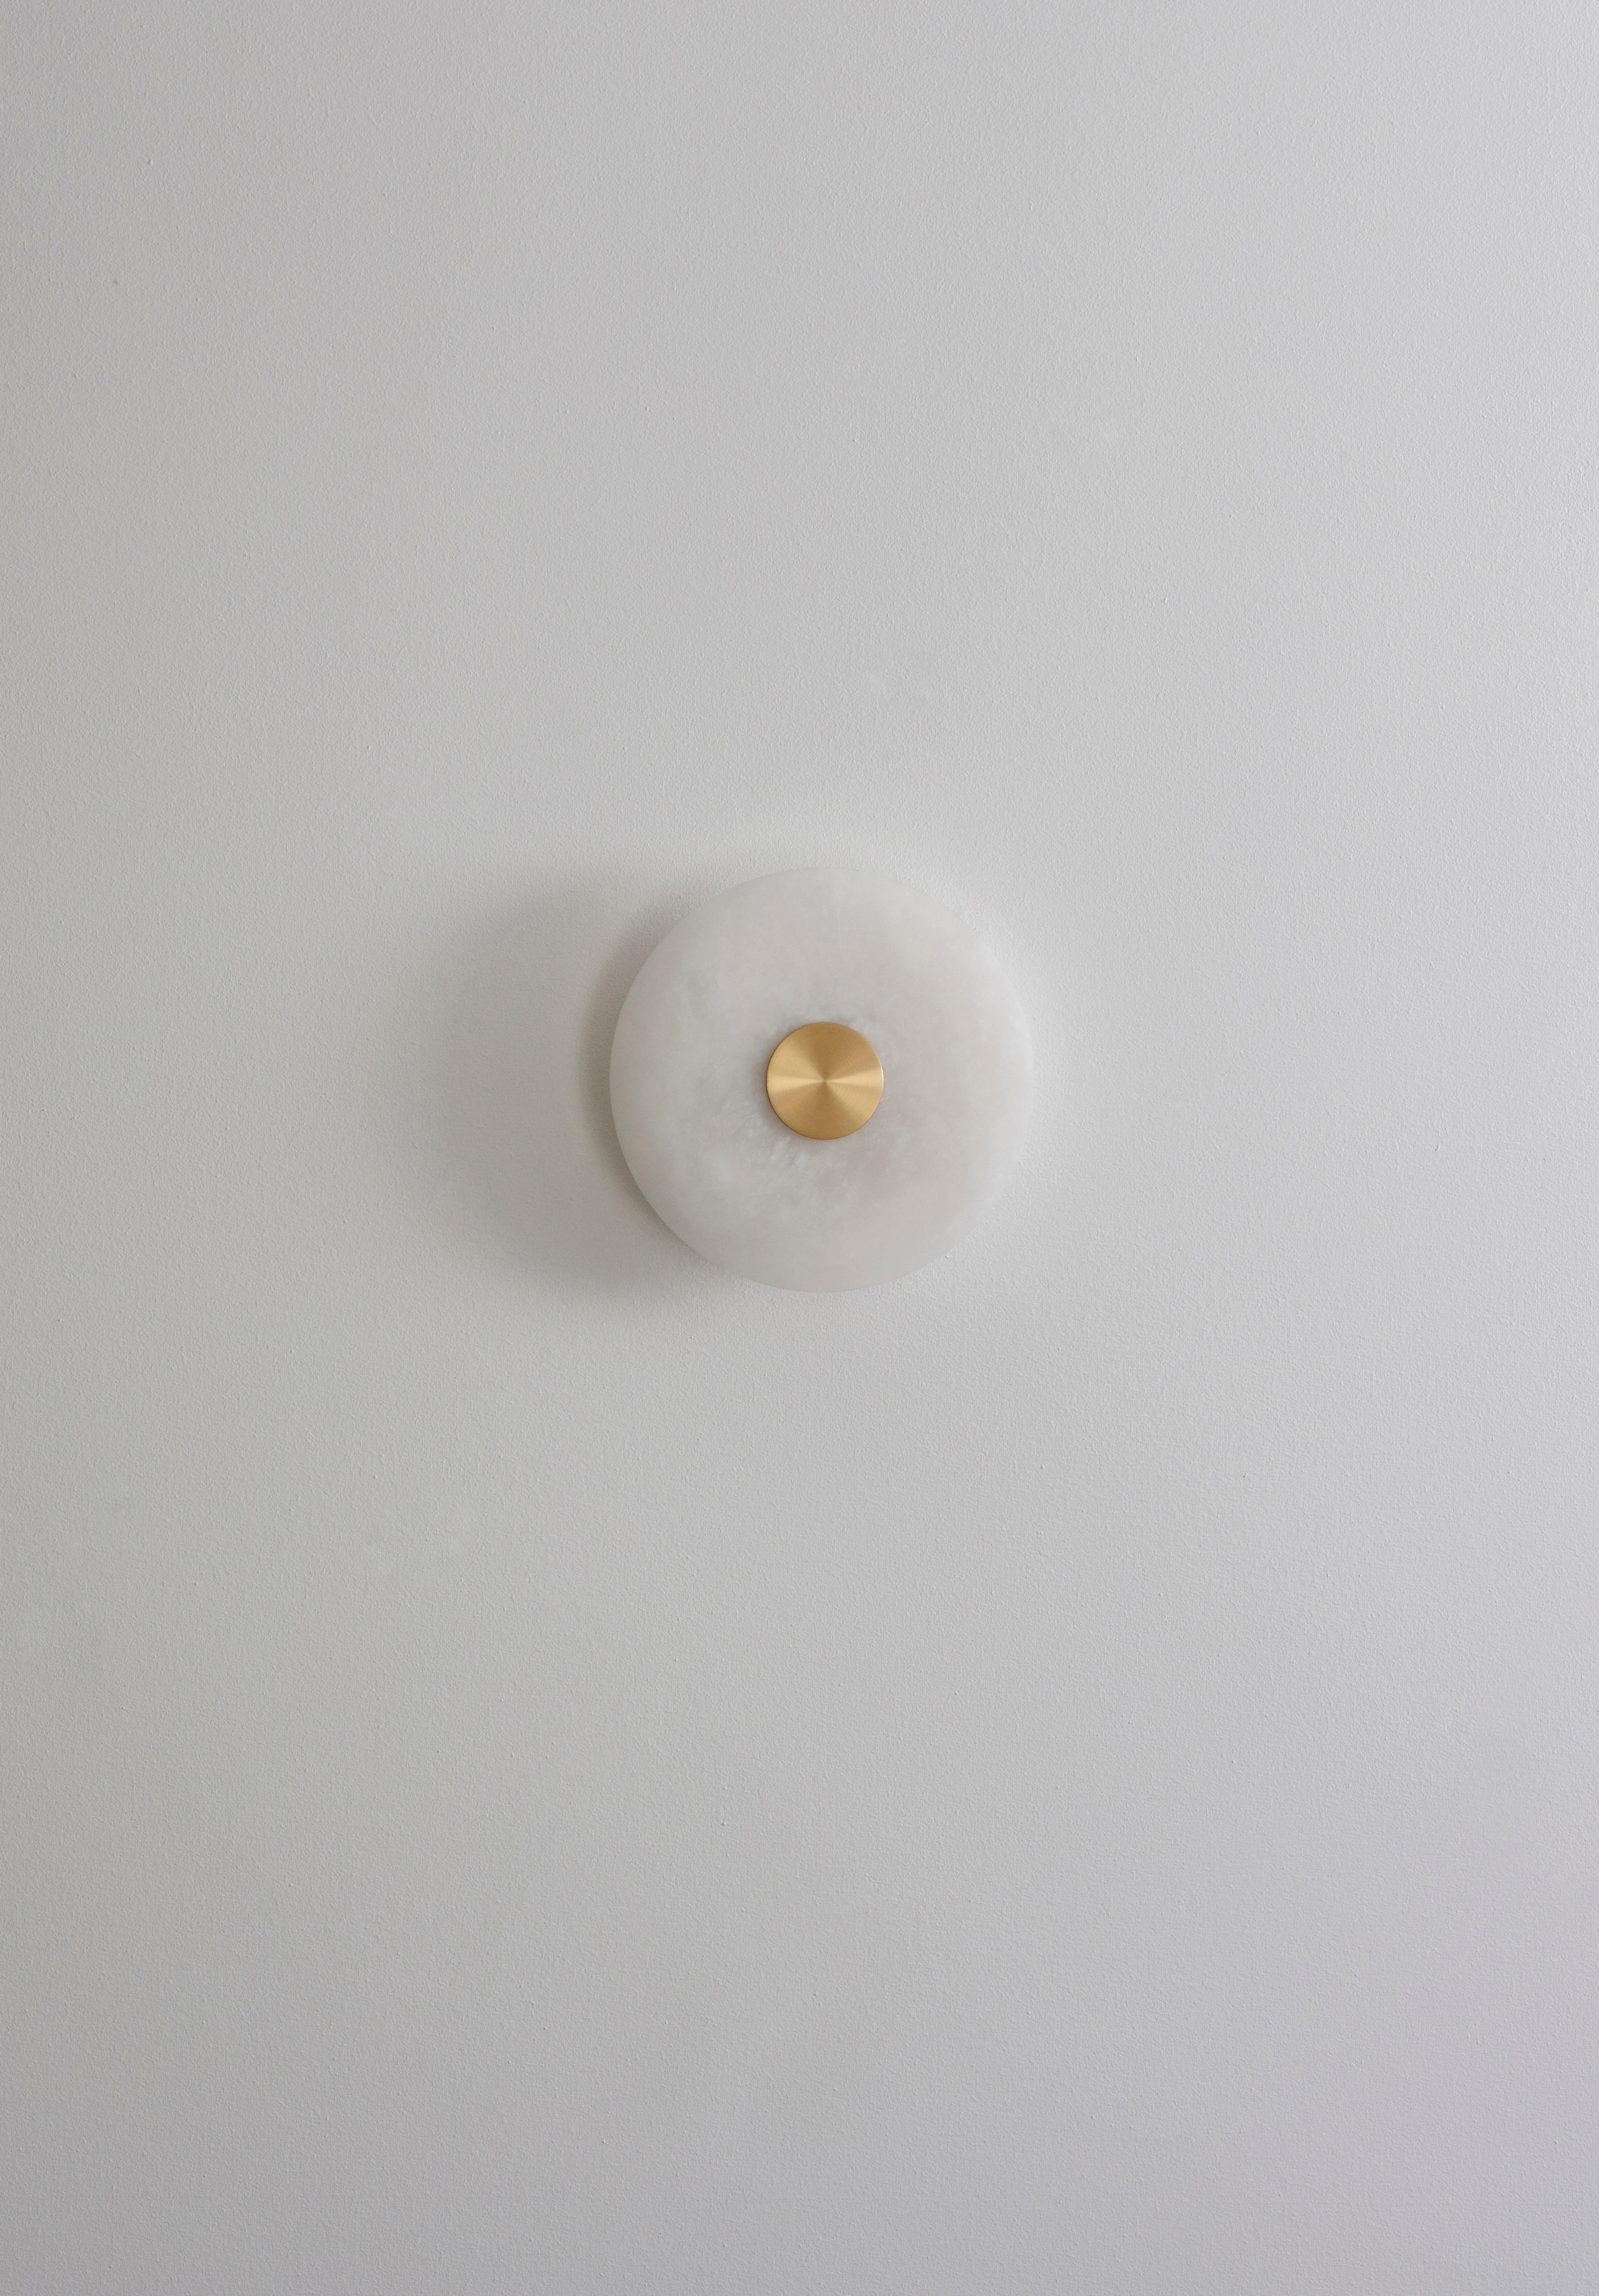 Bide small wall light by Bert Frank
Dimensions: H 26 x D 6.2 cm
Materials: brass, alabaster

Available finishes: Brass, alabaster
All our lamps can be wired according to each country. If sold to the USA it will be wired for the USA for